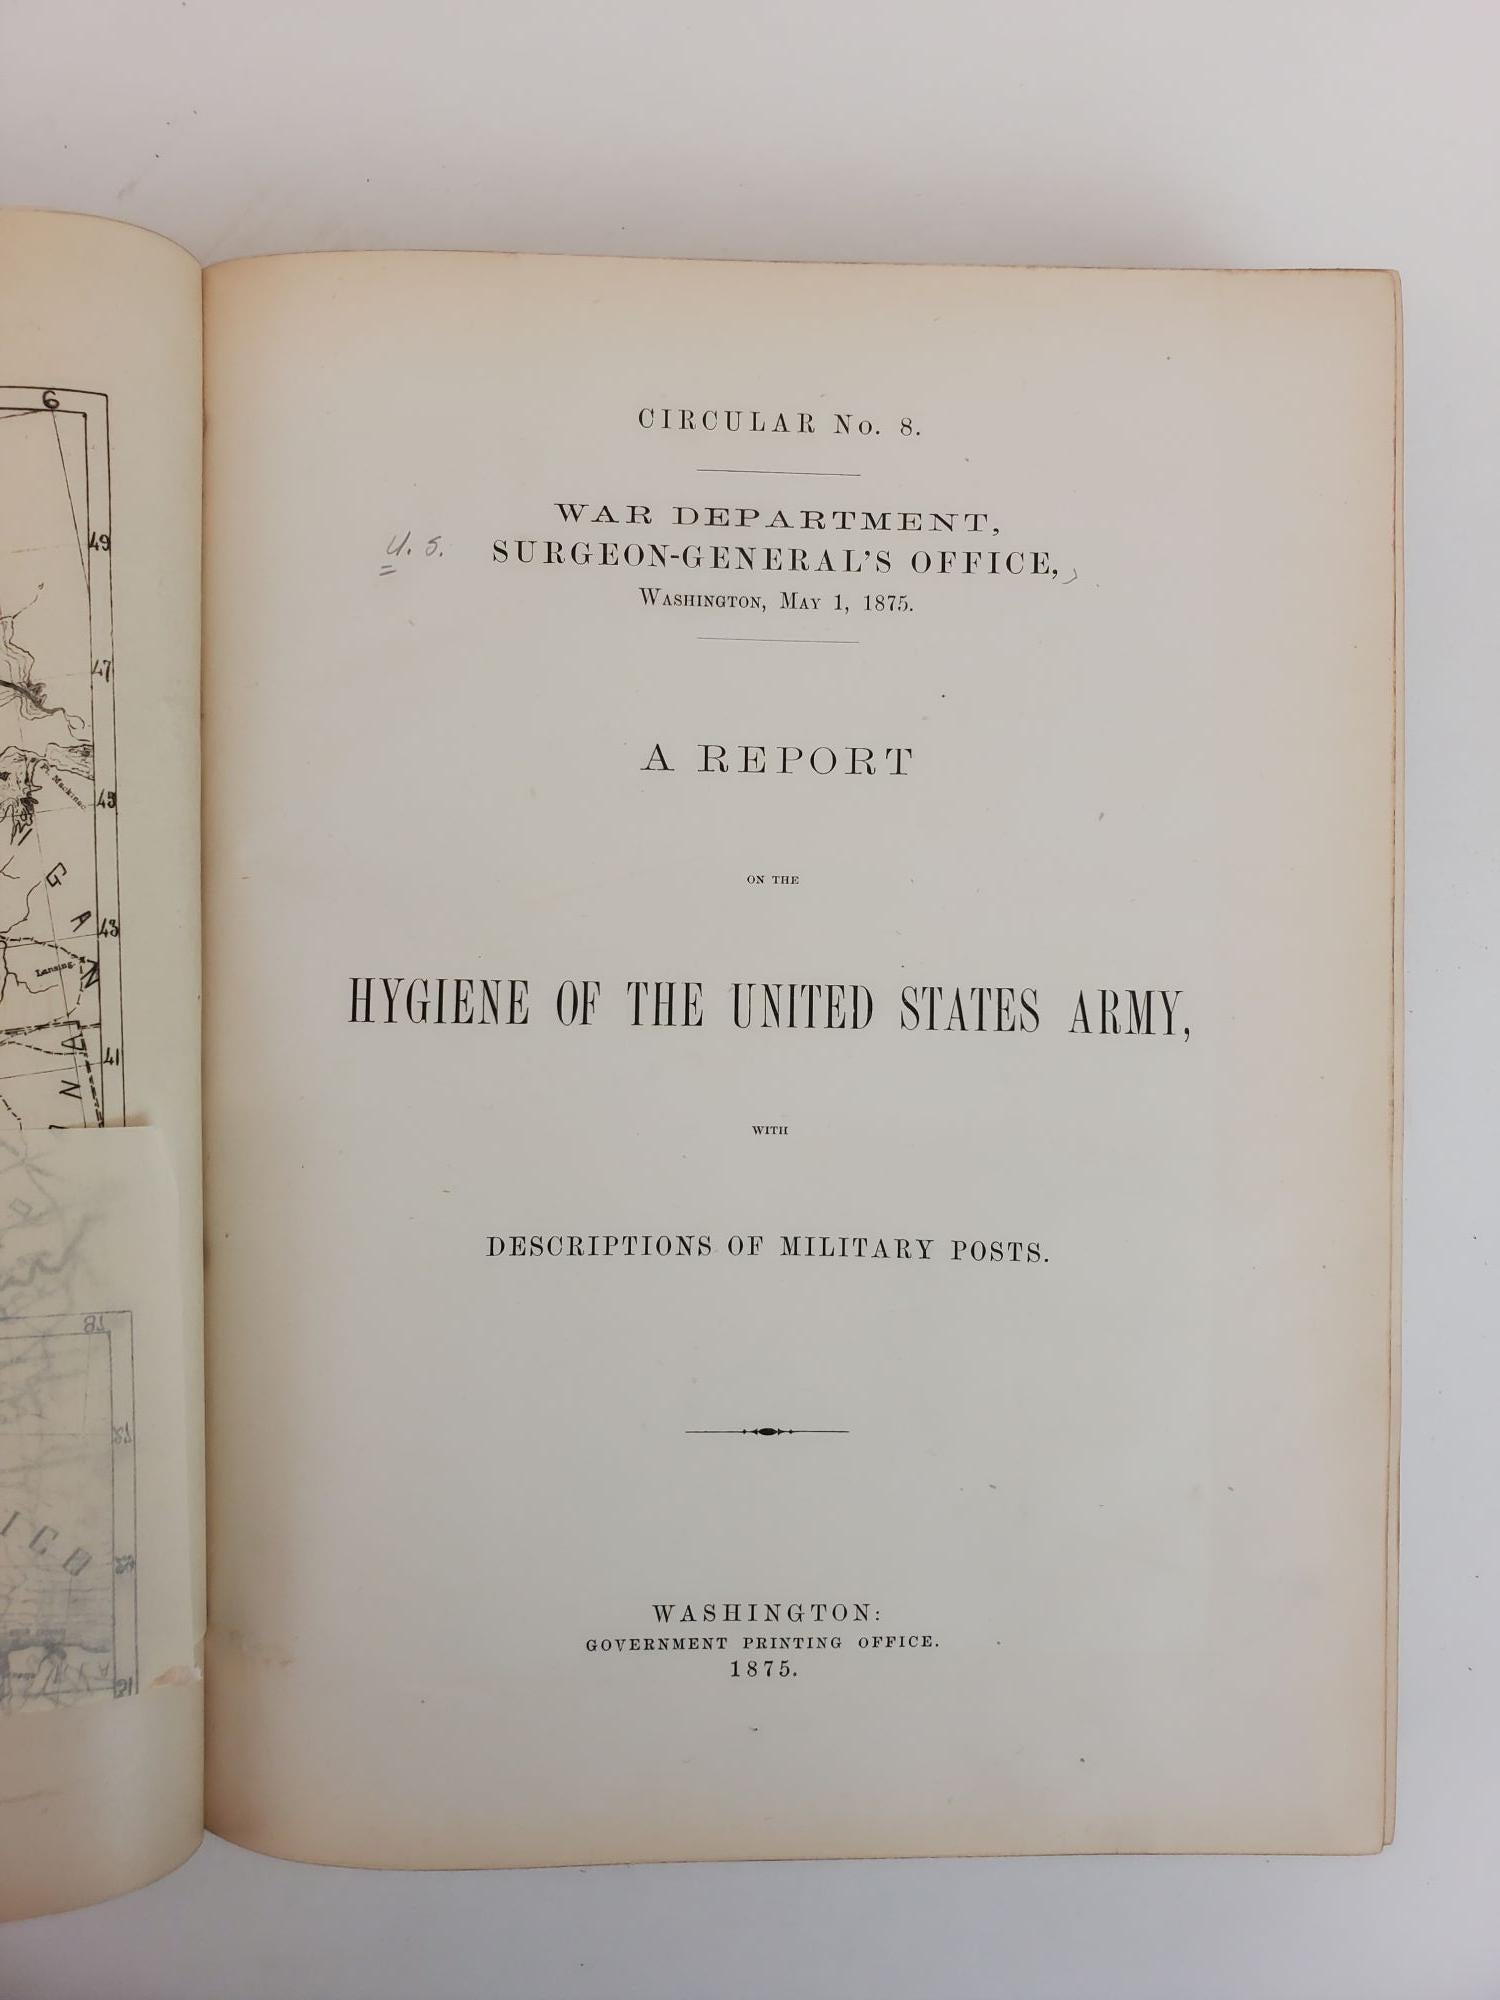 Product Image for A REPORT ON THE HYGIENE OF THE UNITED STATES ARMY, WITH DESCRIPTIONS OF MILITARY POSTS: CIRCULAR NO. 8